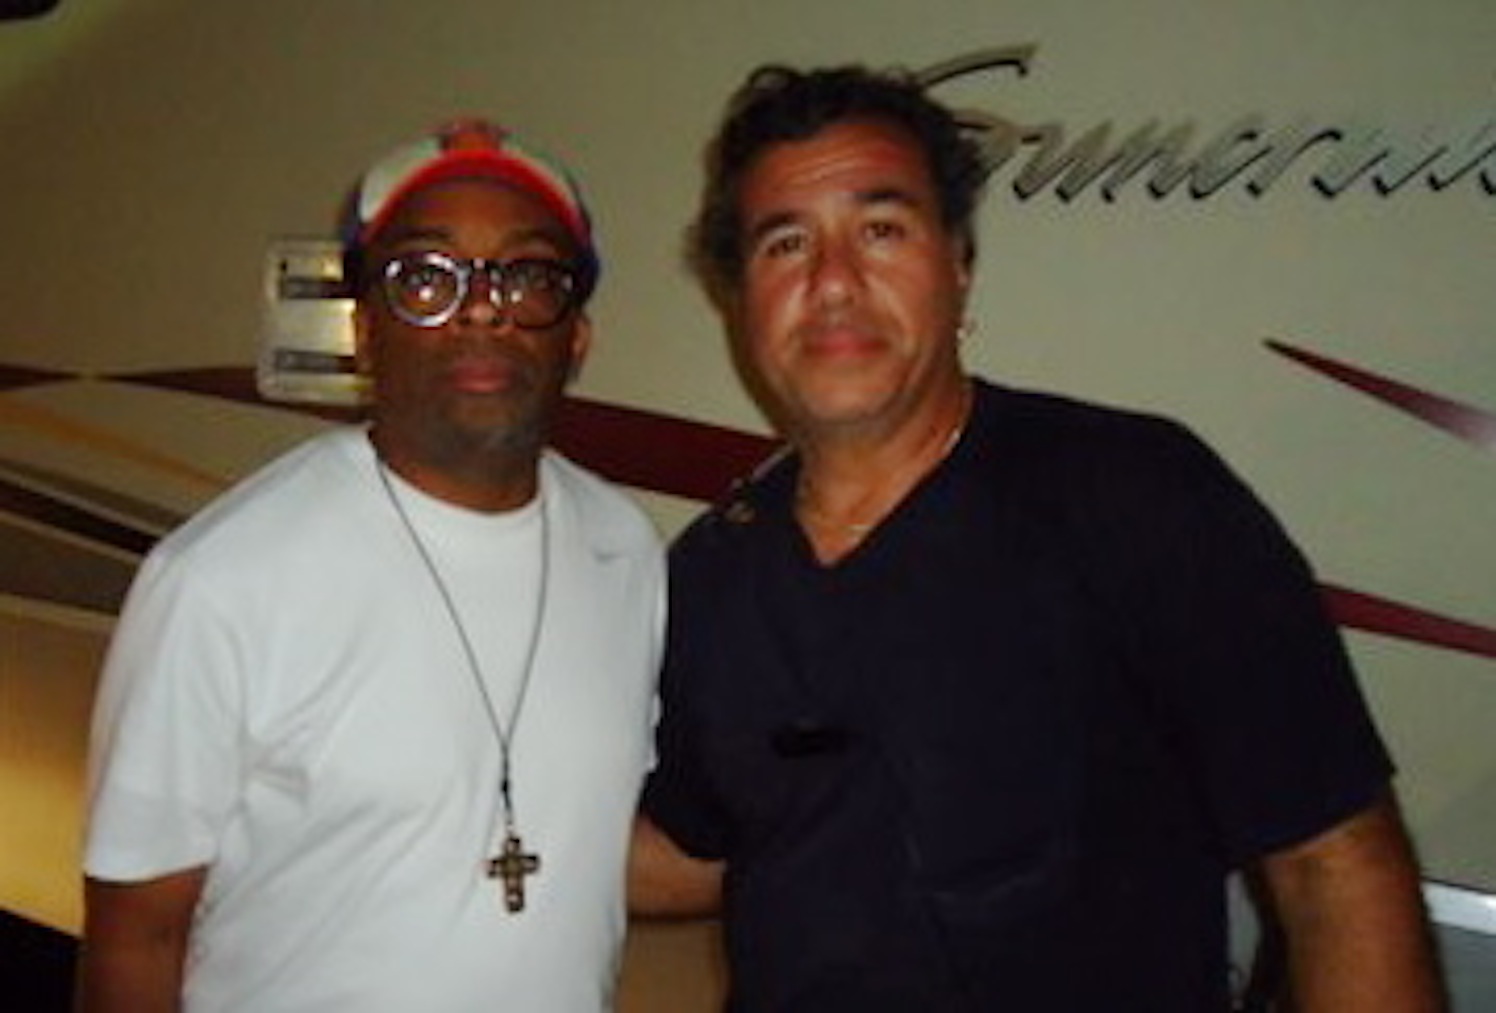 production designer Peter Cordova with Director Spike Lee